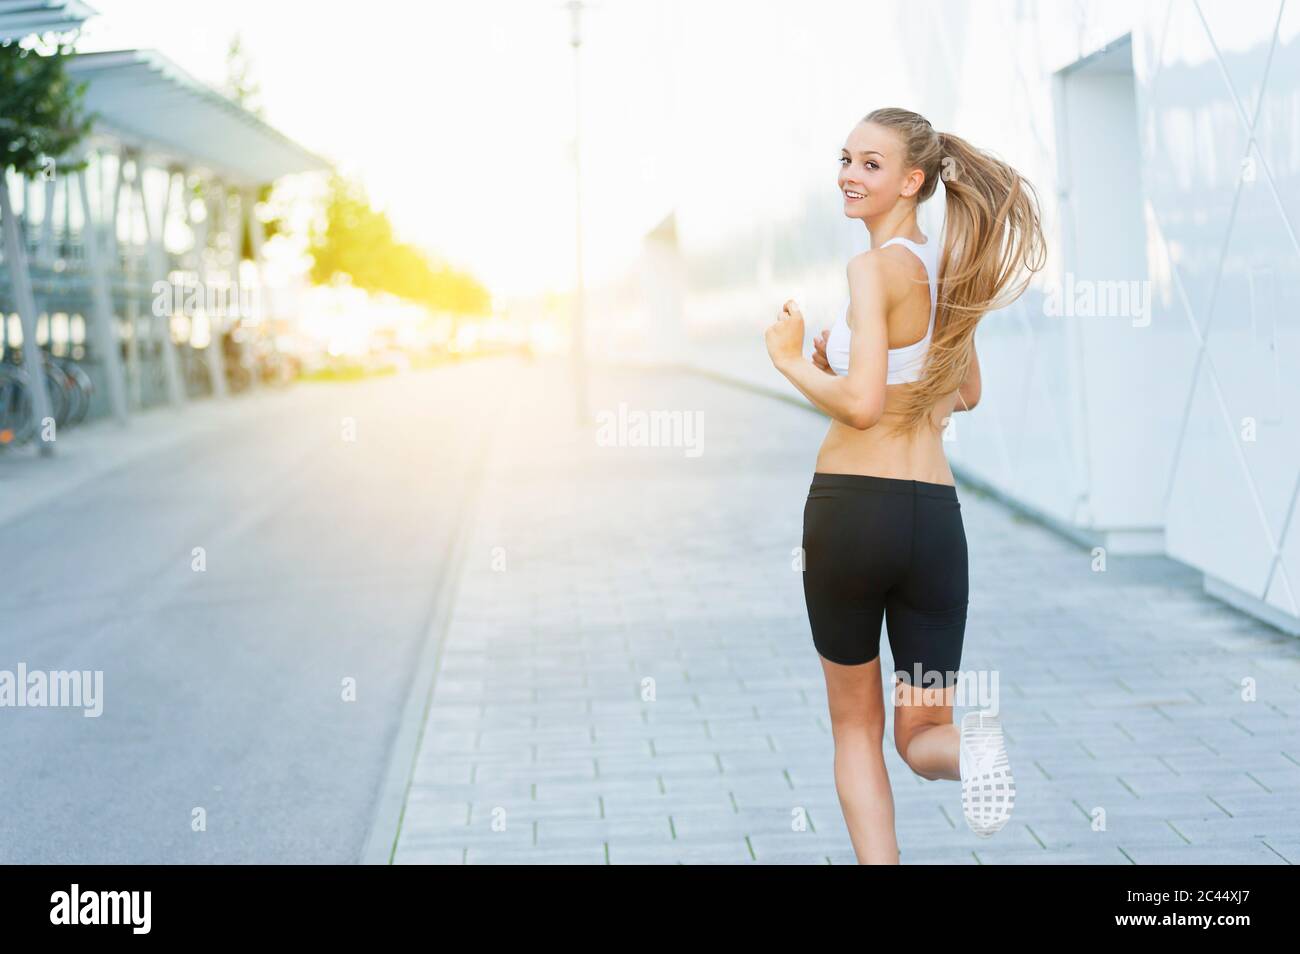 Woman jogging in the city and turning Stock Photo